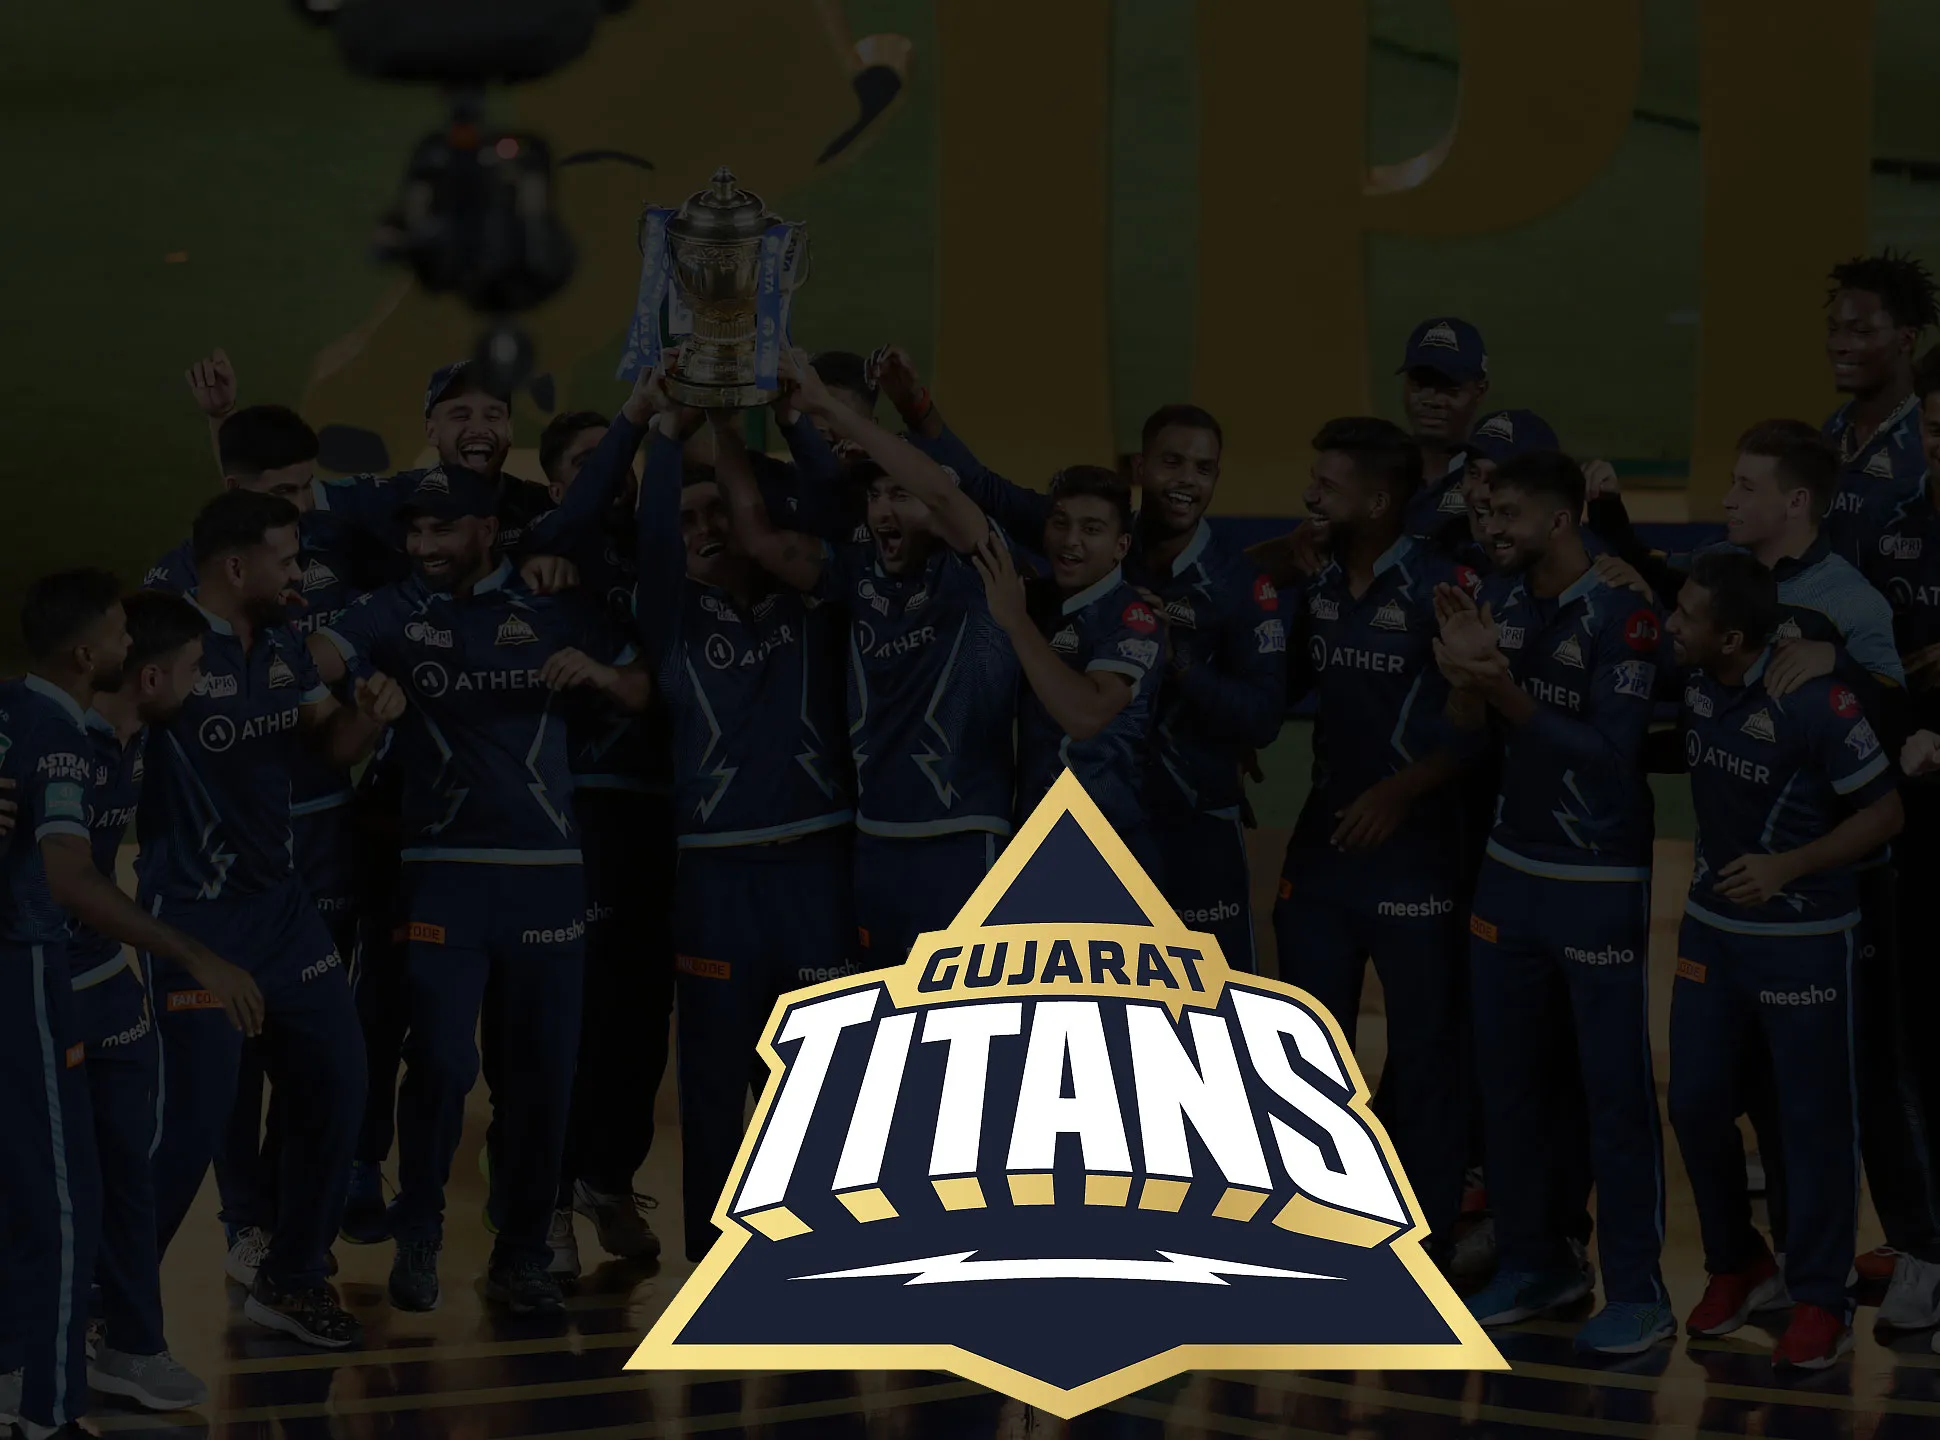 25 players of Gujarat Titans will play in the IPL2023.